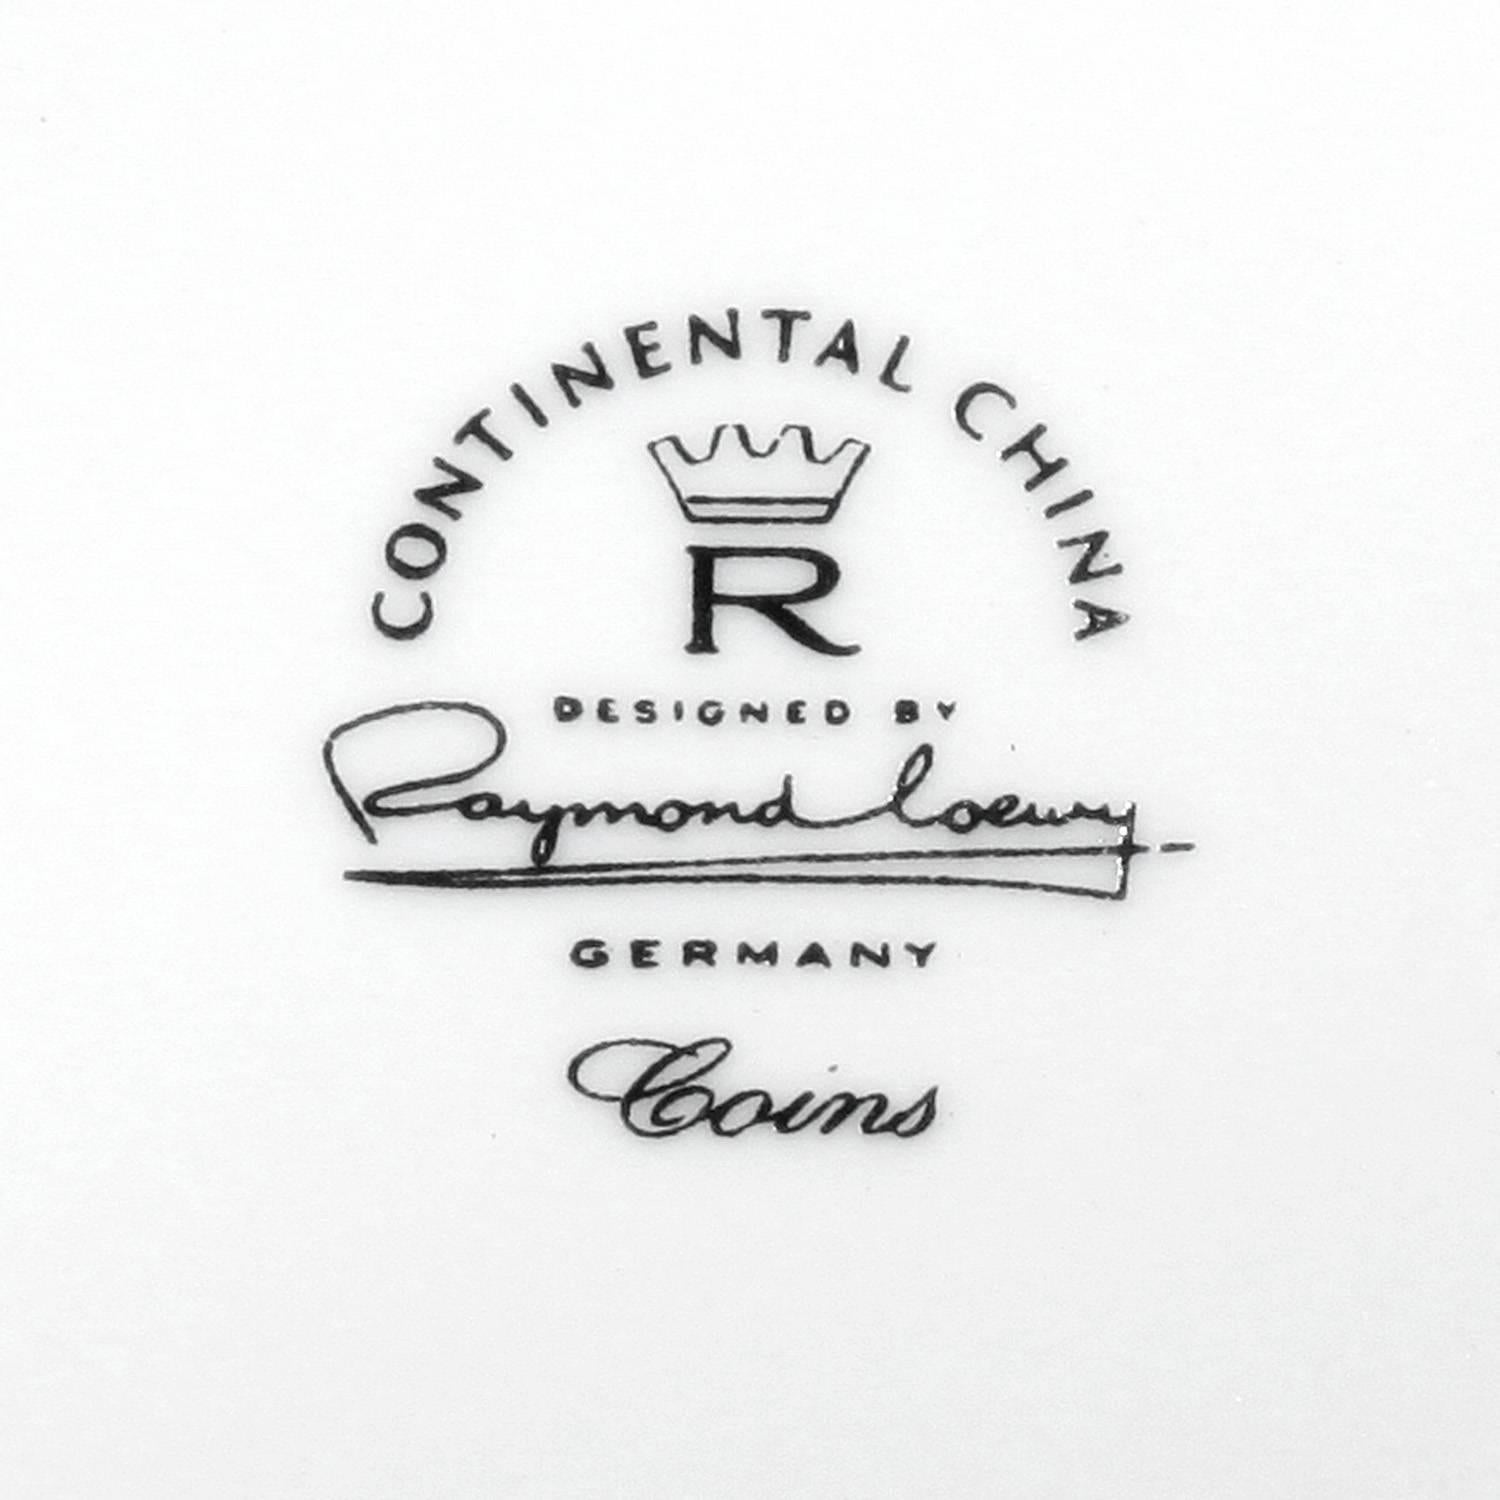 Mid-20th Century Fine China Service for 12 by Raymond Loewy for Continental China, Germany